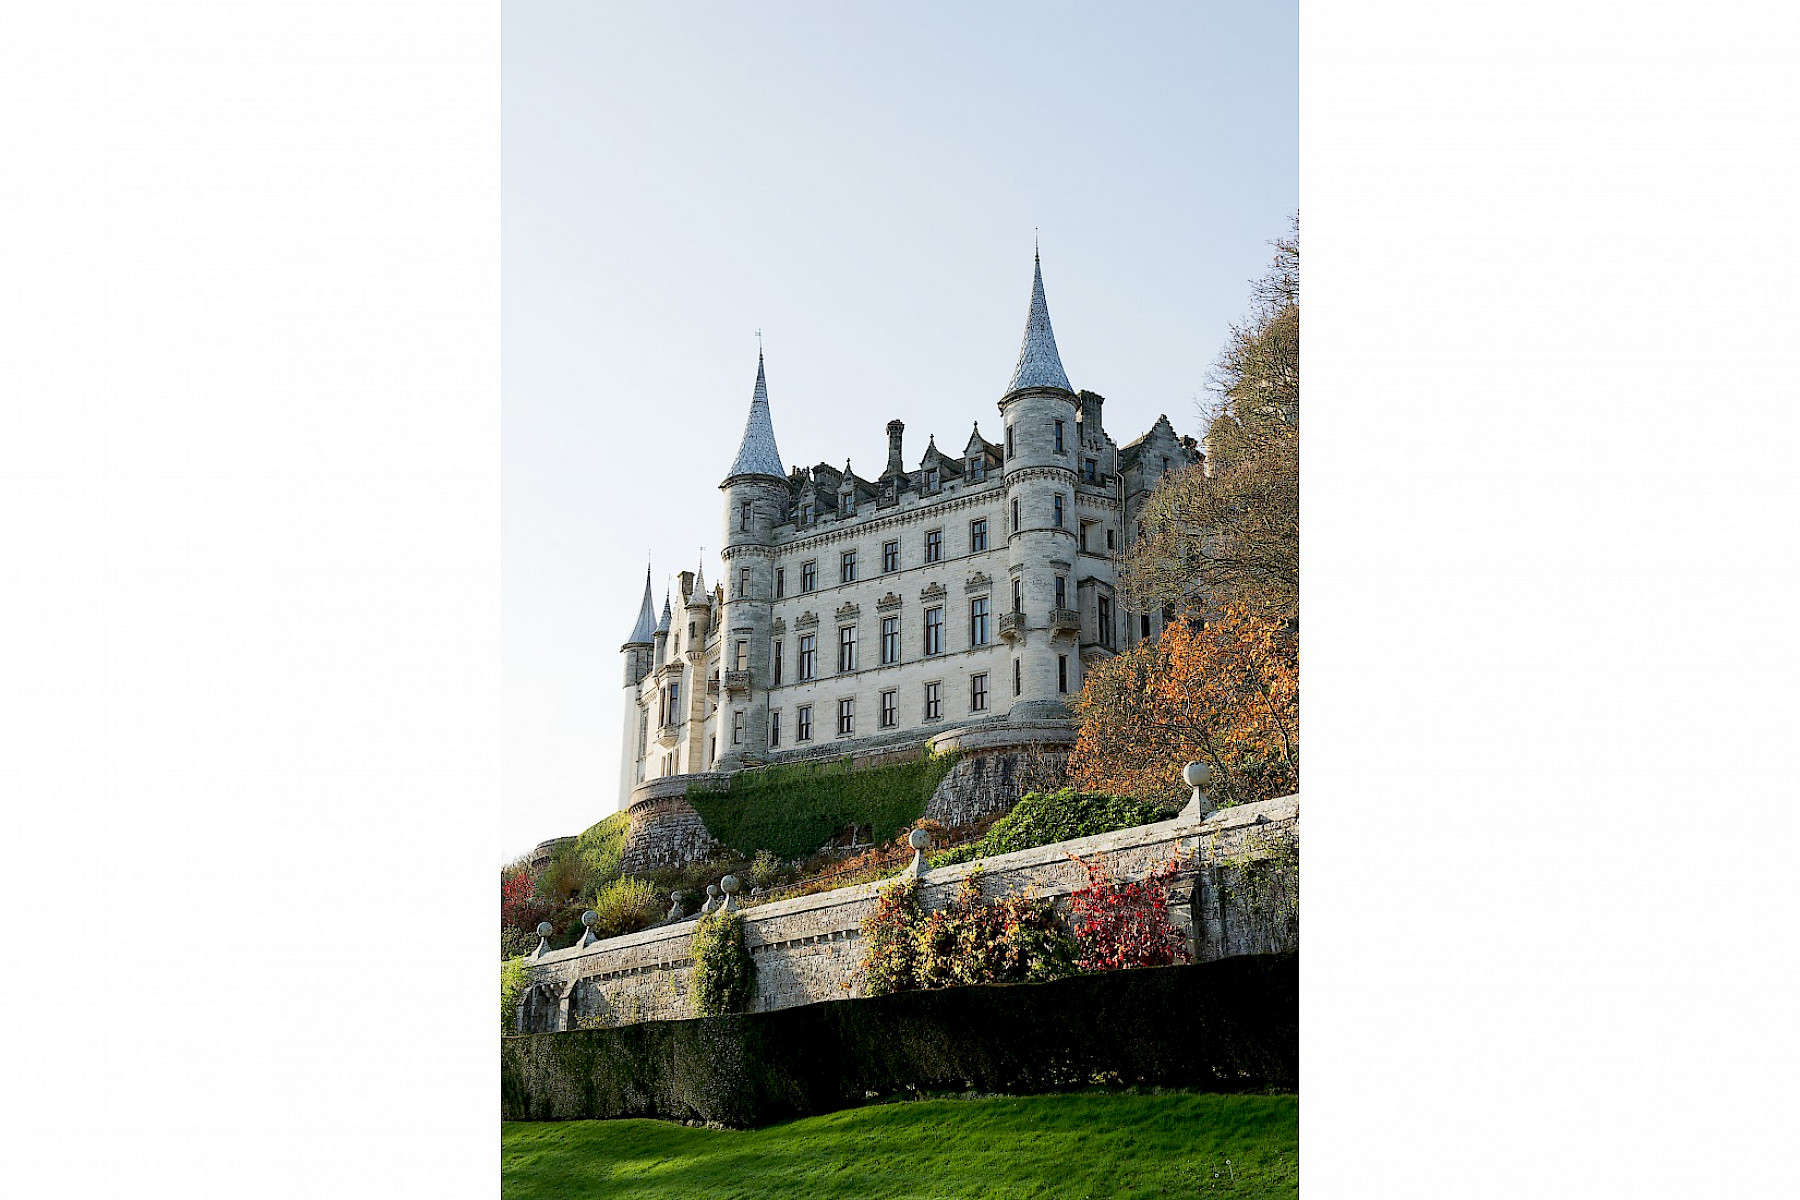 Golspie image: Fairytale Dunrobin Castle with spires and elaborate gardens.